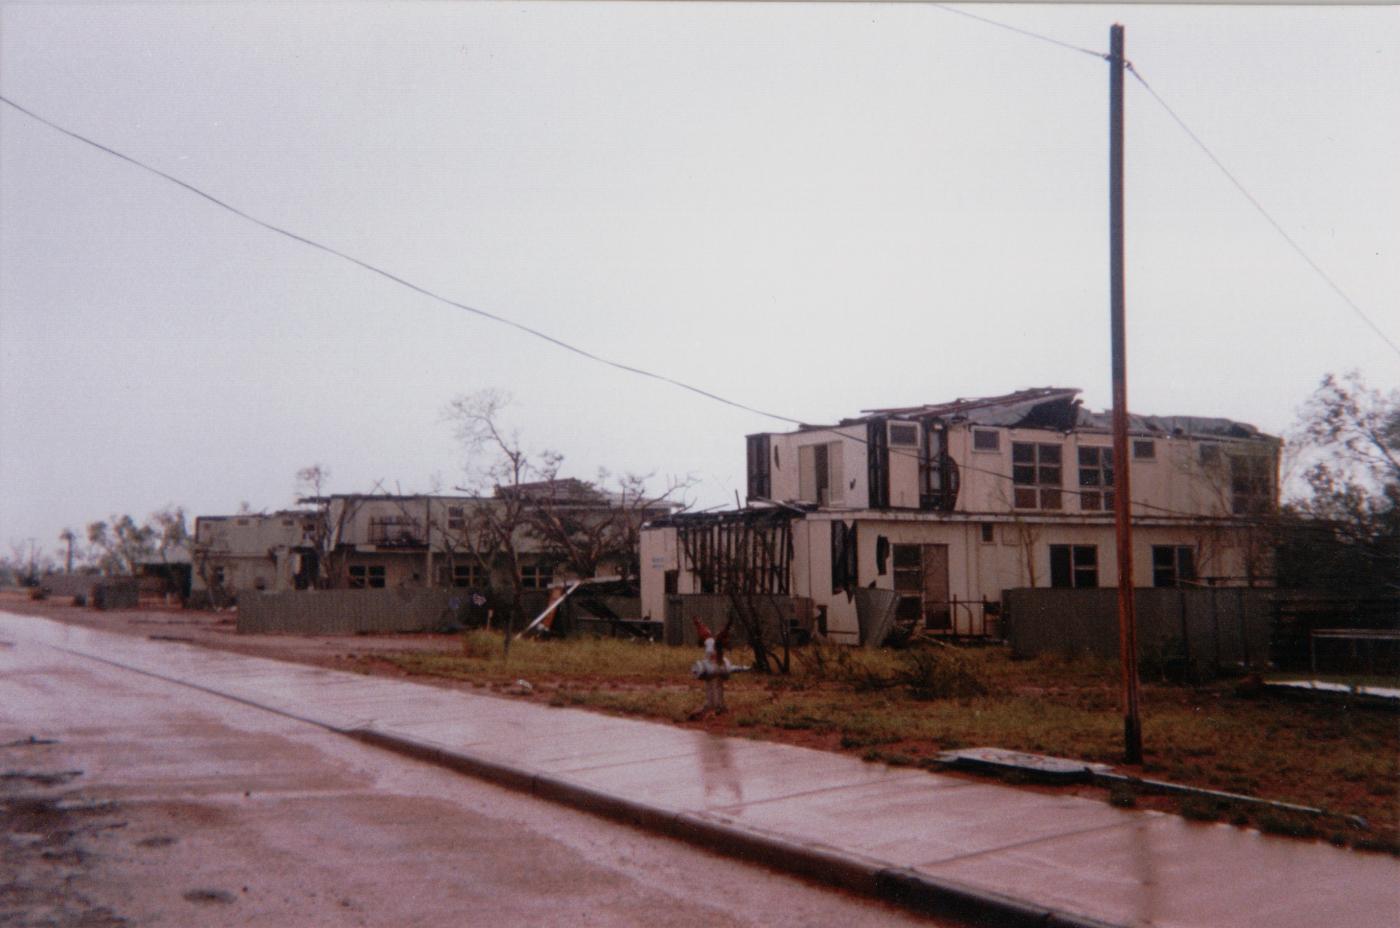 image showing house destroyed by Cyclone Vance